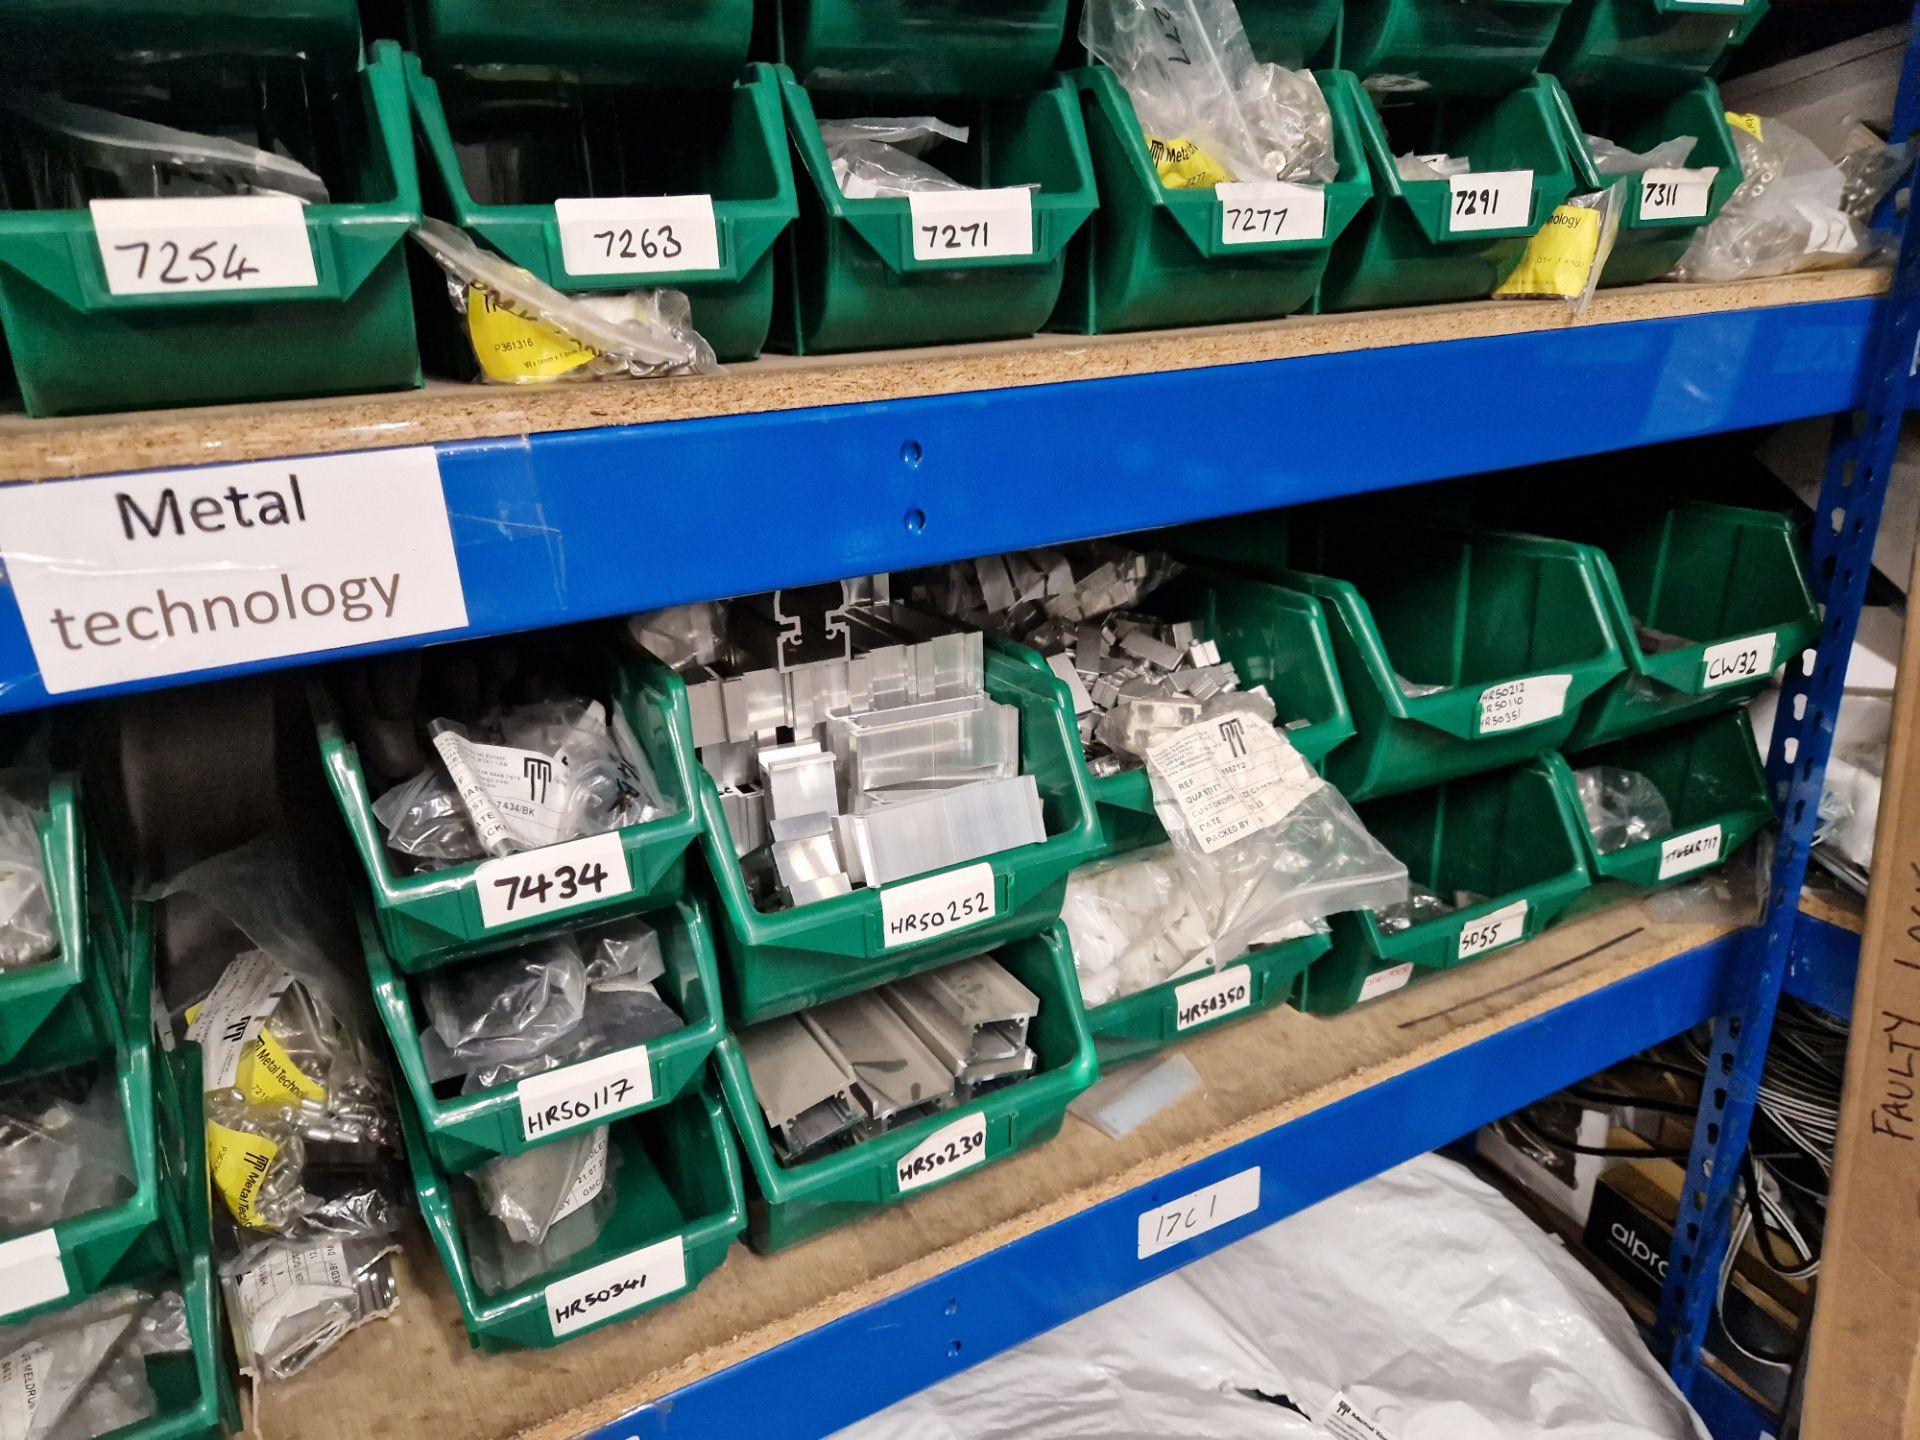 Contents to One Bay of Shelving, including Rubber Gaskets, Aluminium Profile, End Caps, Screws, - Image 6 of 6